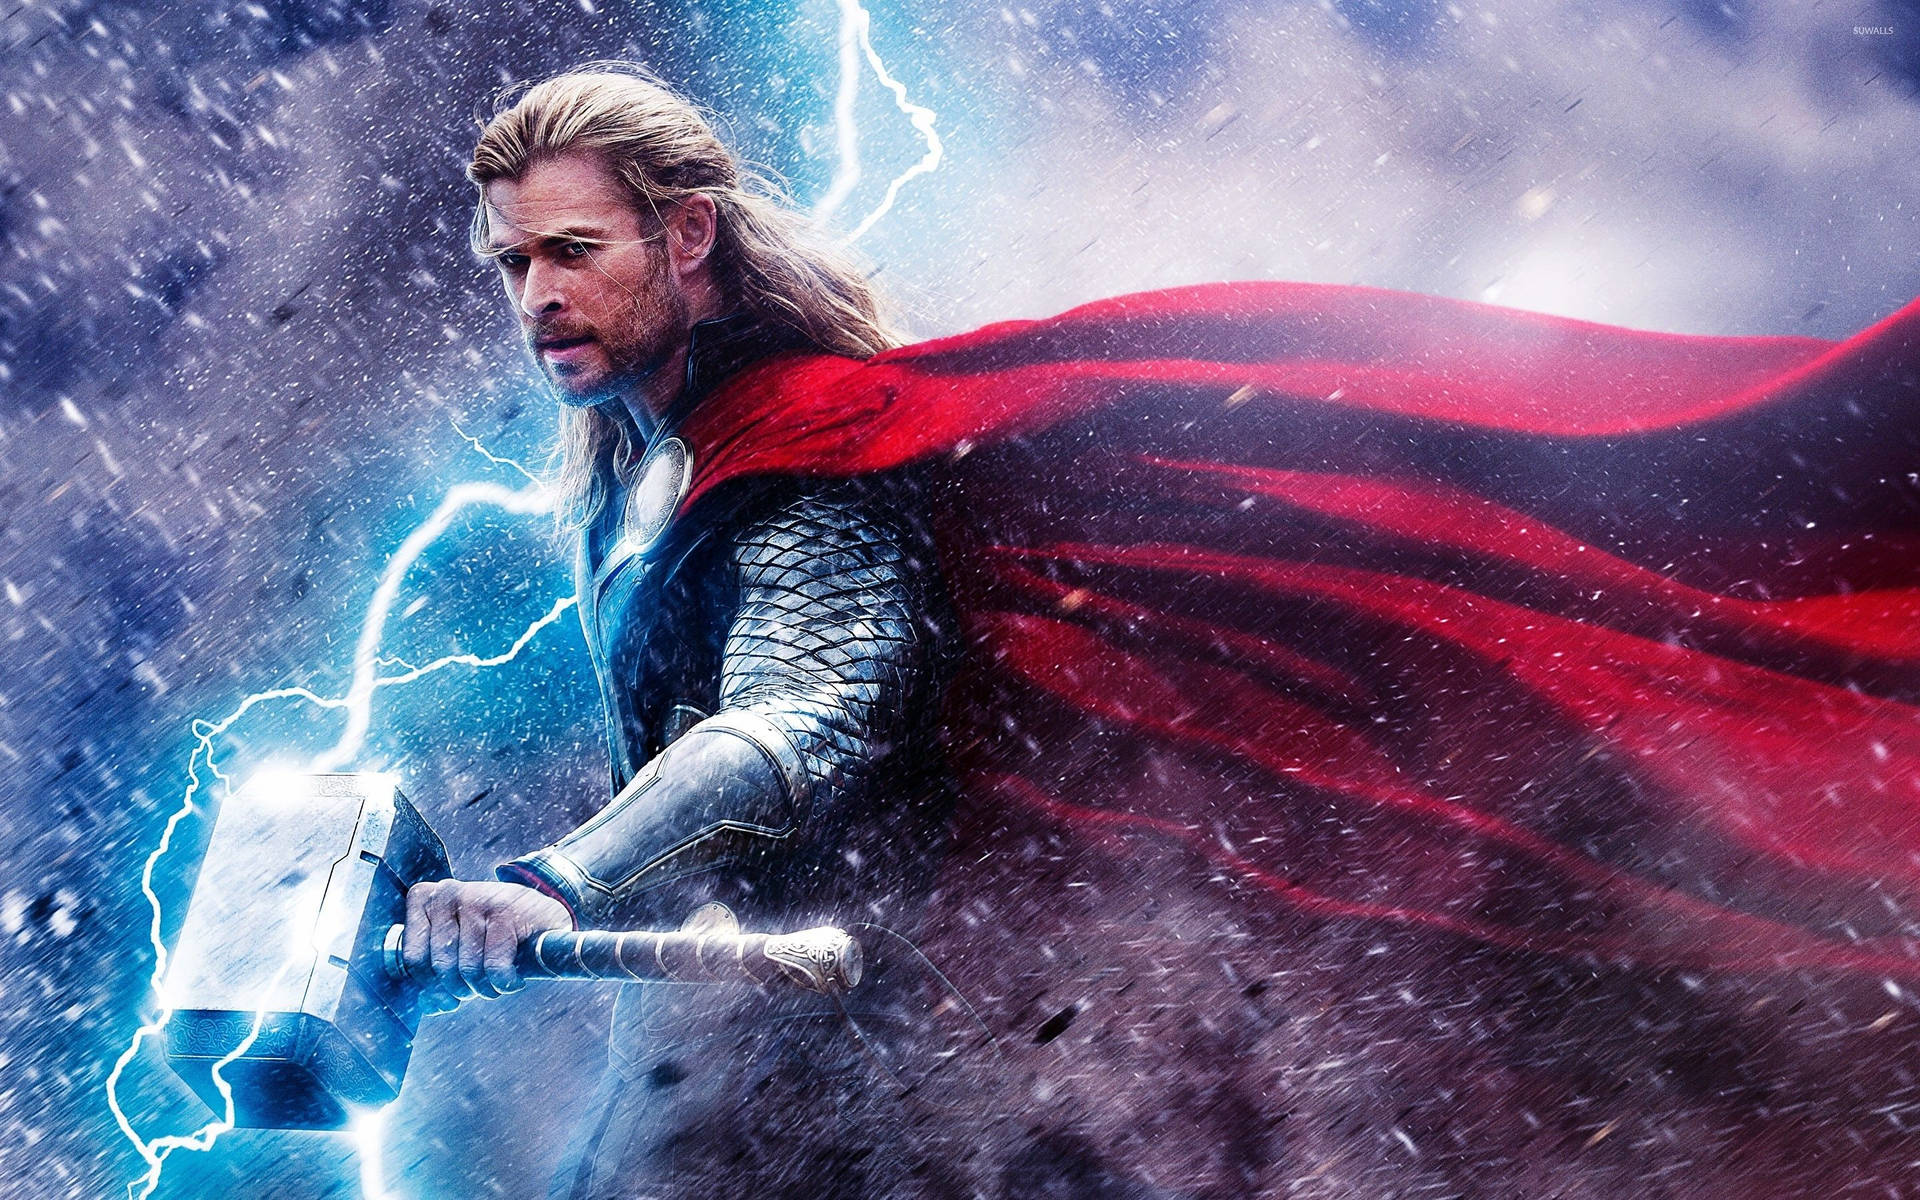 Turn up the heat with Thor and his trusty hammer Mjolnir. Wallpaper